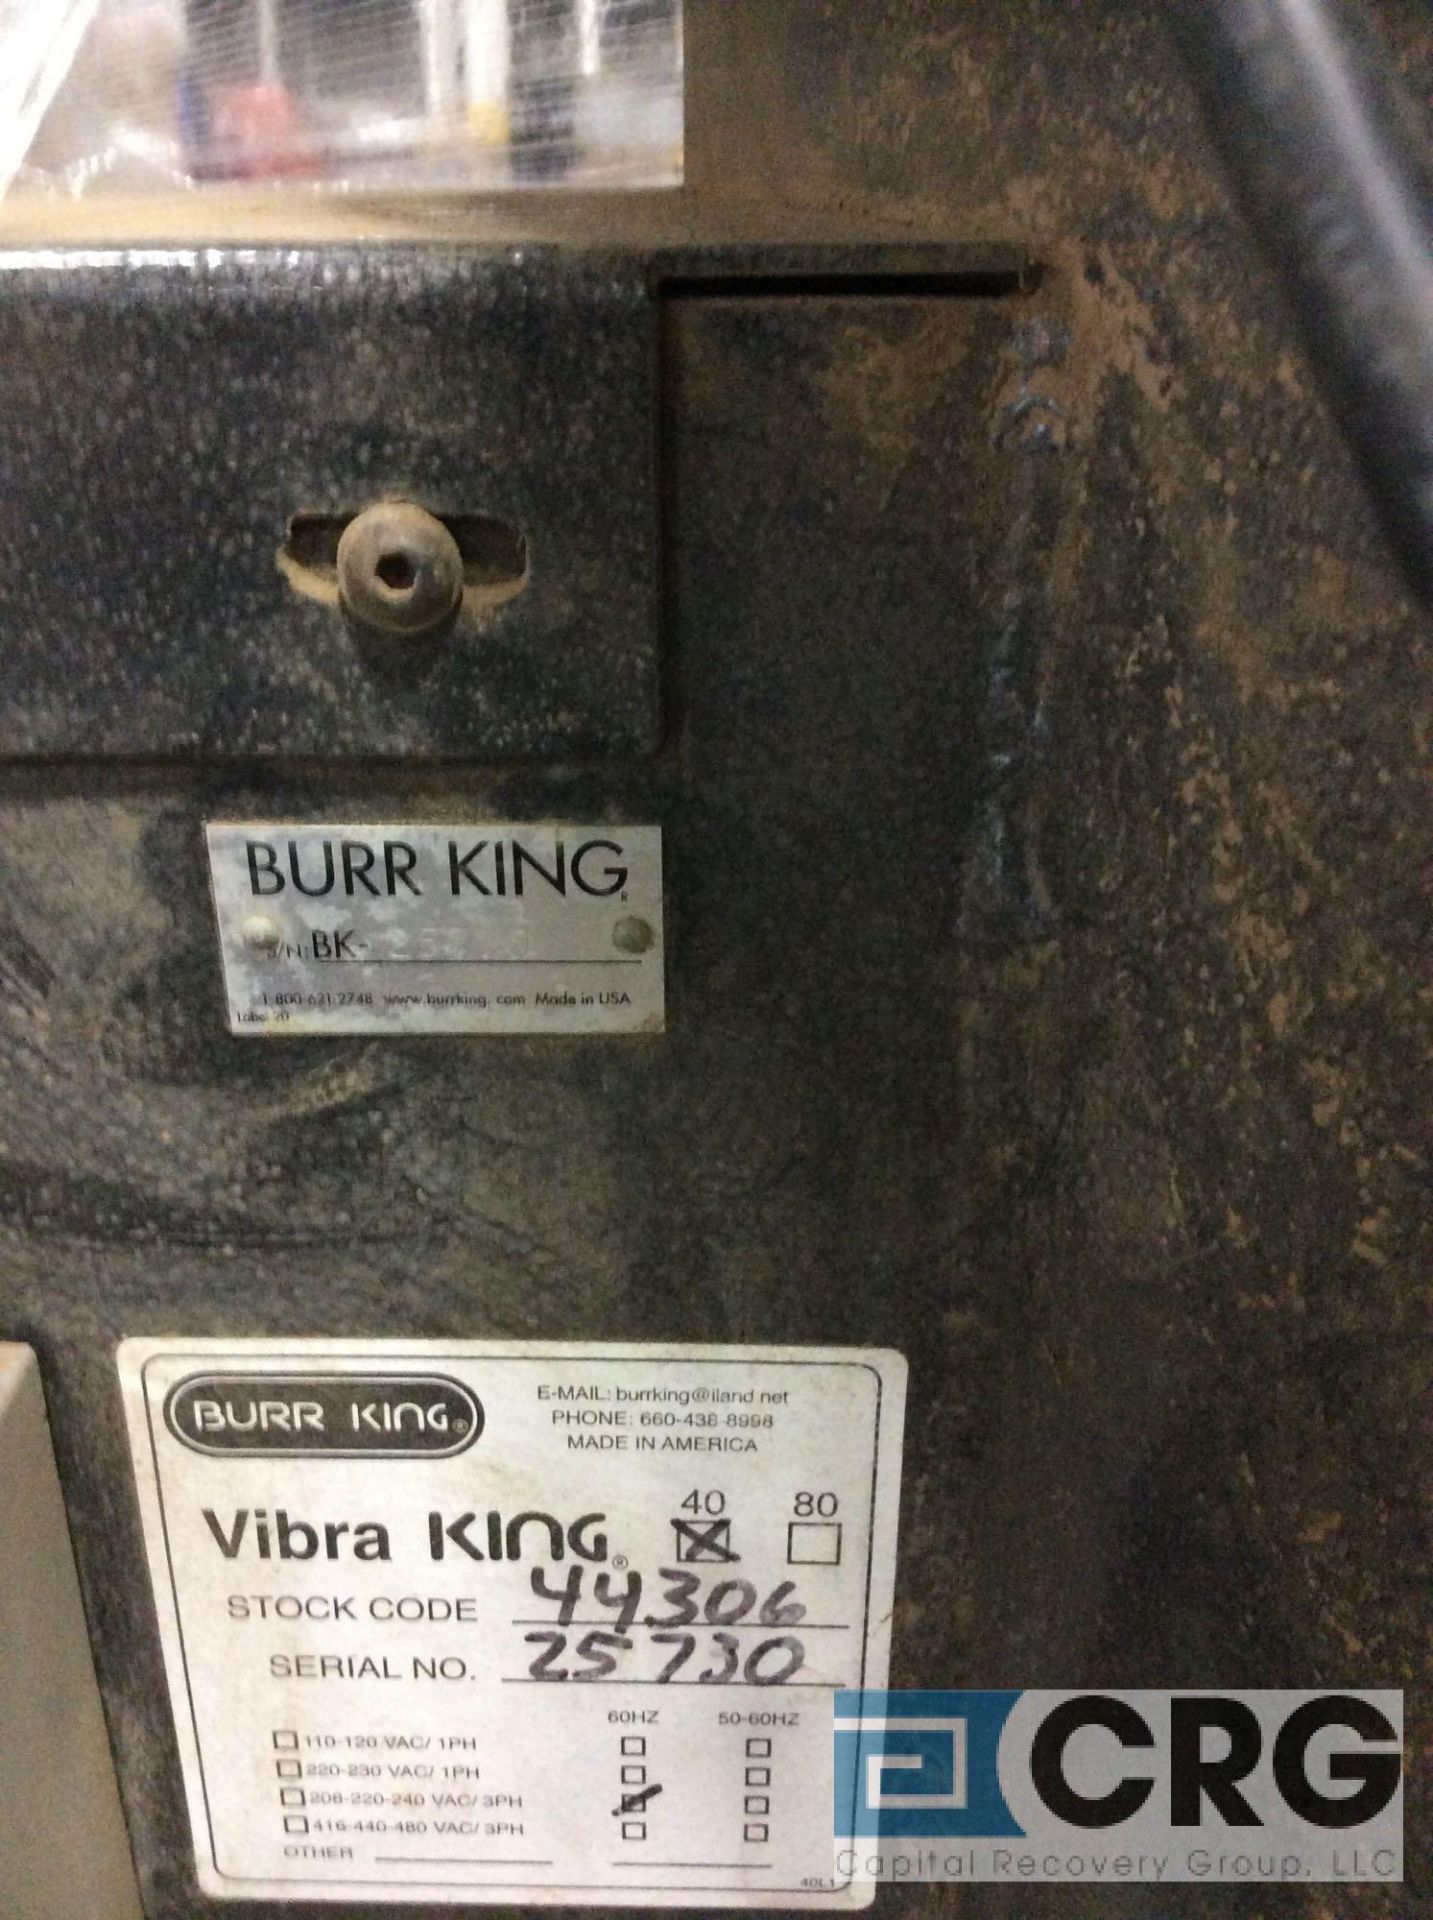 Burr King VIBRA KING 40, 40 inch deburring machine (wrapped and palletized, ready to ship) - Image 5 of 6